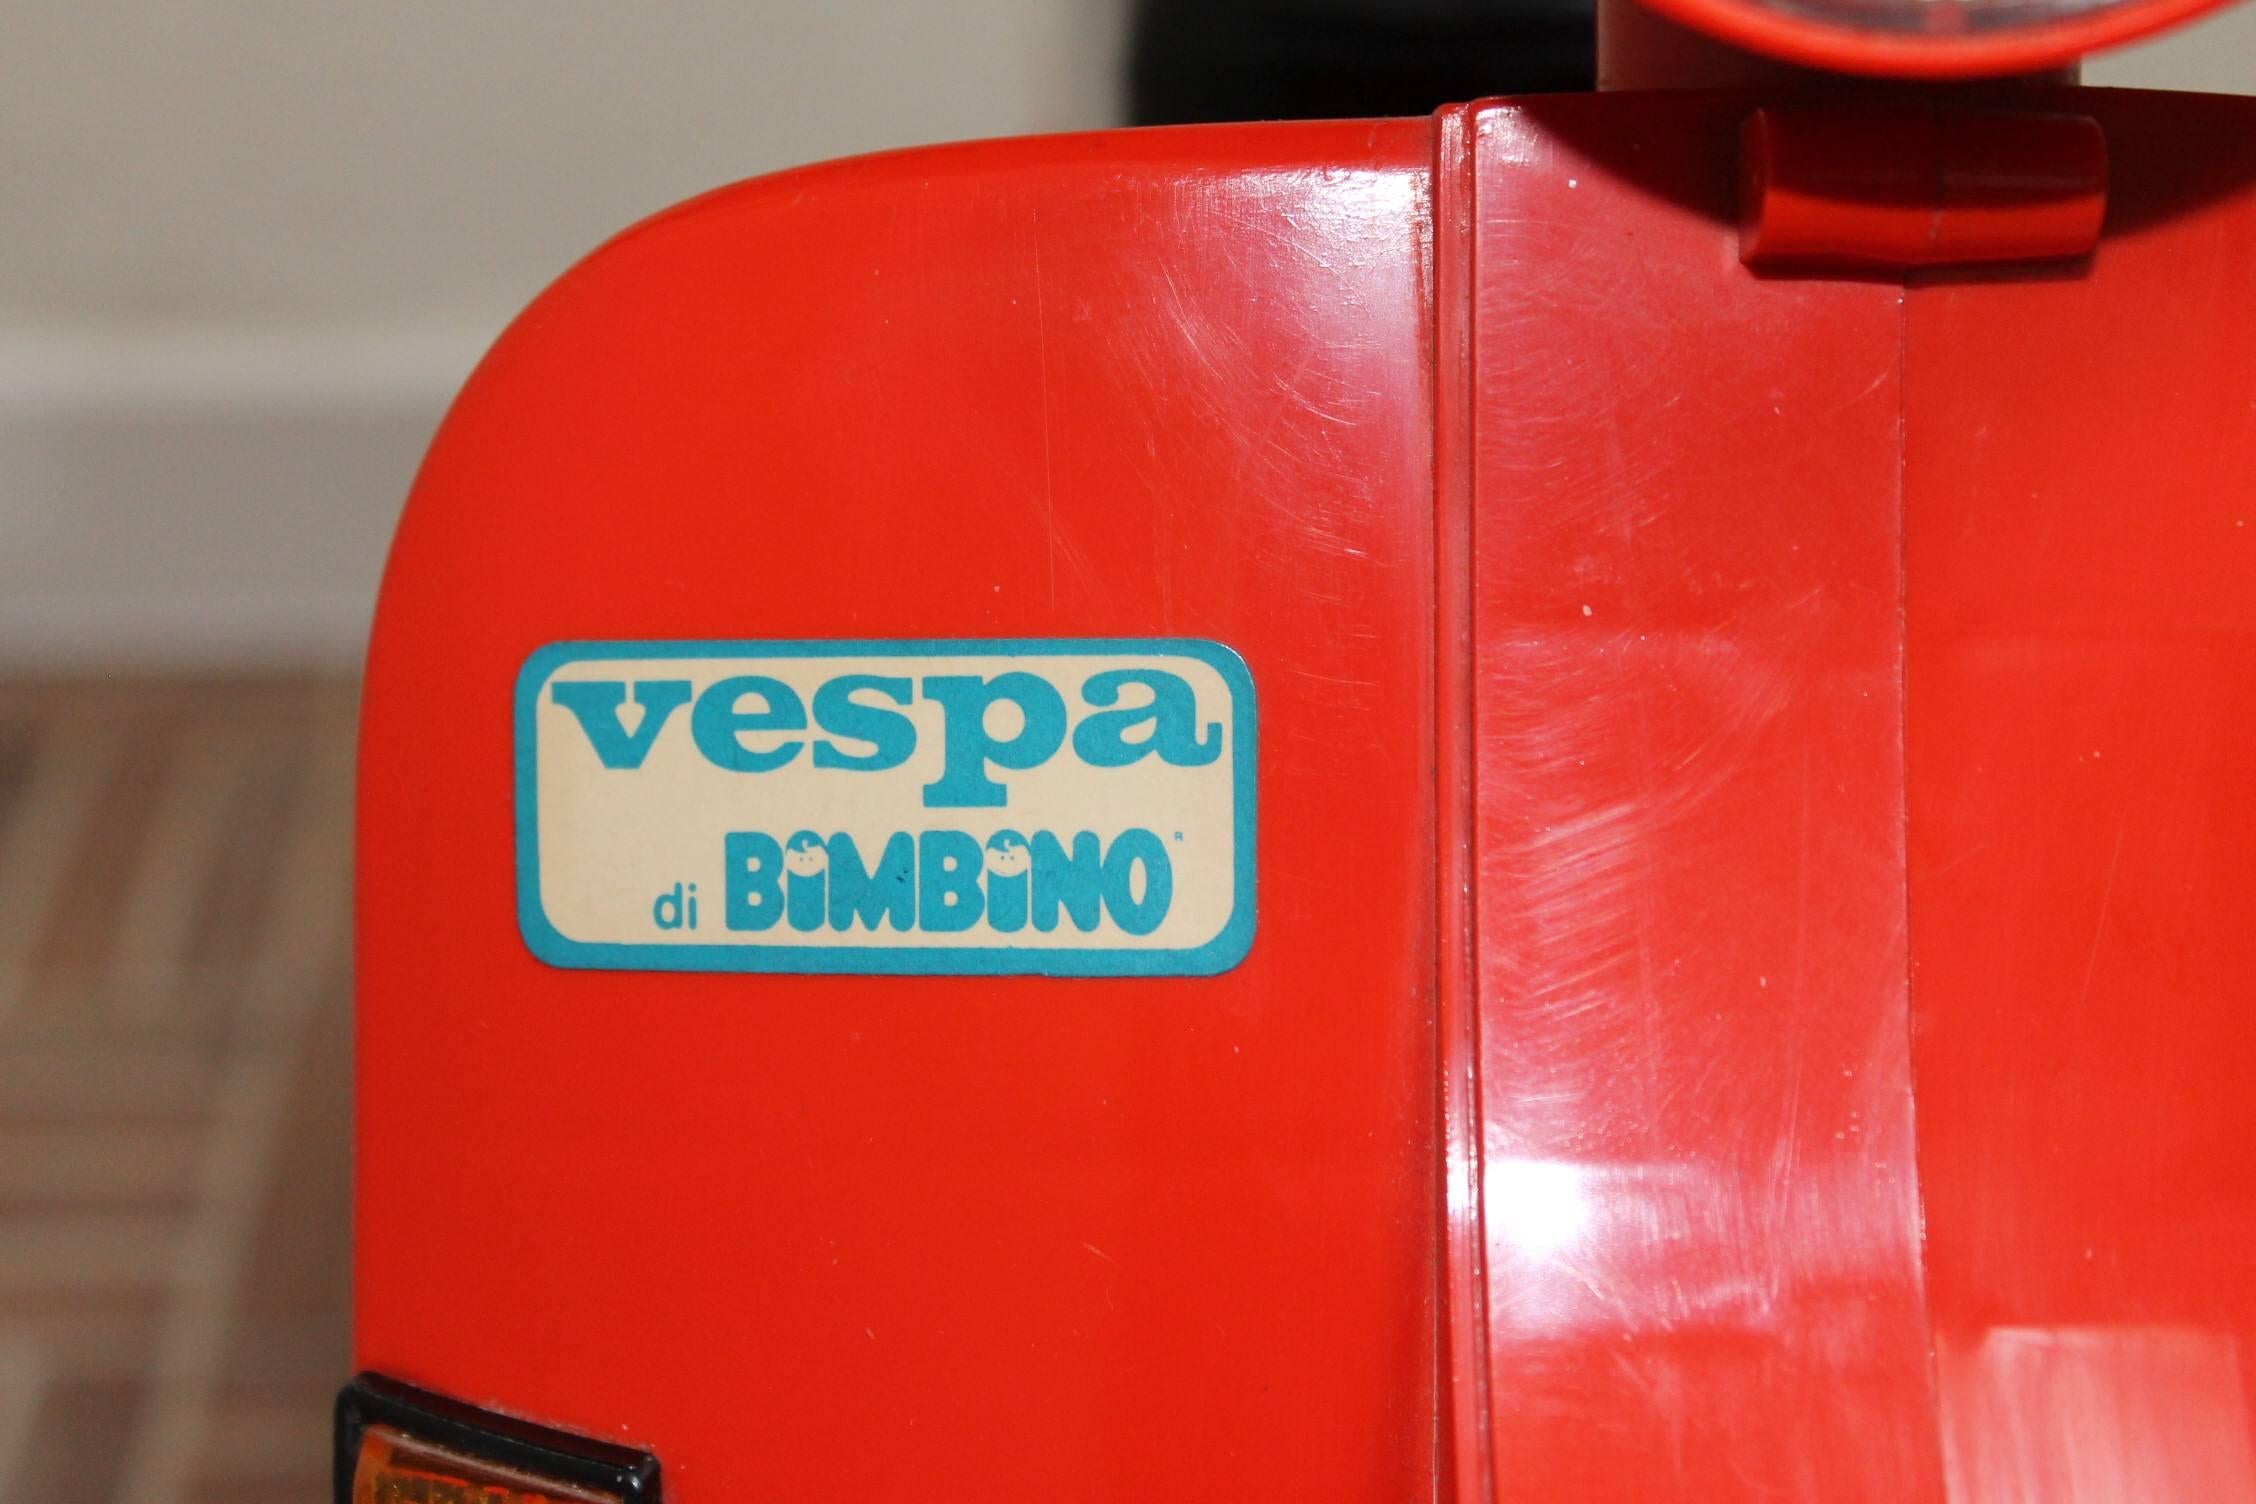 Lovely Iittle electric Vespa Di Bimbino - child's ride-on scooter 
Battery Operated Children's Toy - Piaggio model - hard plastic.
Italian model PX 200 E - 1980s.
A must have for any (Oldtimer) Scooter Fan. 
This baby Vespa scooter is the eldest